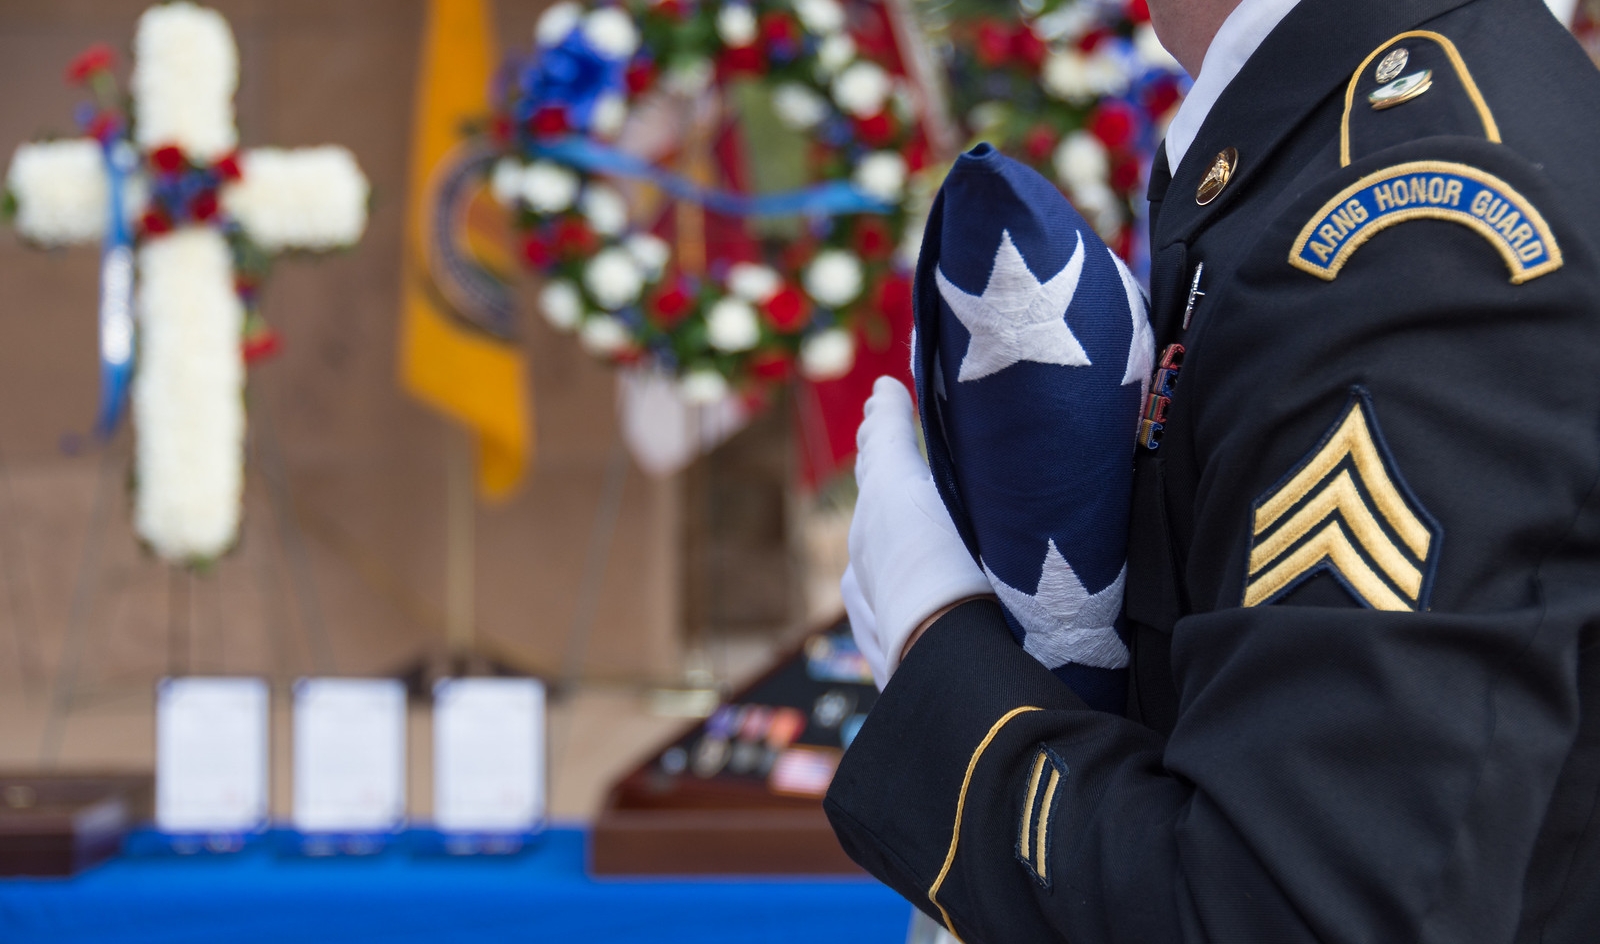 Arizona Military Funeral Honors. At the funeral, a soldier dressed in a fine suit brazing the American flag to his chest. In a ceremonial event surrounding